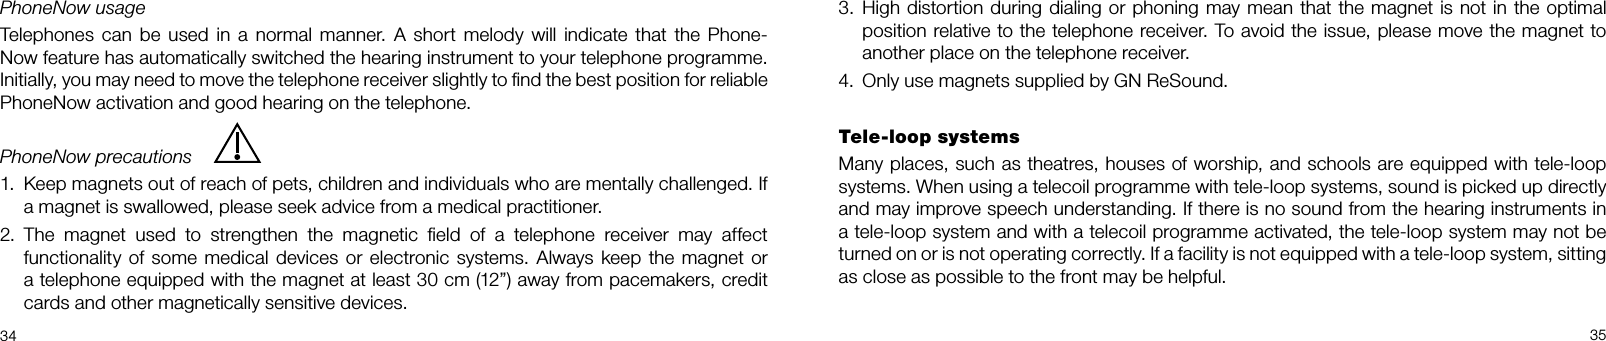  34 35PhoneNow usageTelephones can be used in a normal manner. A short melody will indicate that the Phone-Now feature has automatically switched the hearing instrument to your telephone programme.  Initially, you may need to move the telephone receiver slightly to ﬁnd the best position for reliable PhoneNow activation and good hearing on the telephone. PhoneNow precautions1.  Keep magnets out of reach of pets, children and individuals who are mentally challenged. If a magnet is swallowed, please seek advice from a medical practitioner.2.  The magnet used to strengthen the magnetic ﬁeld of a telephone receiver may affect functionality of some medical devices or electronic systems. Always keep the magnet or a telephone equipped with the magnet at least 30 cm (12”) away from pacemakers, credit cards and other magnetically sensitive devices.3.  High distortion during dialing or phoning may mean that the magnet is not in the optimal position relative to the telephone receiver. To avoid the issue, please move the magnet to another place on the telephone receiver.4.  Only use magnets supplied by GN ReSound.Tele-loop systemsMany places, such as theatres, houses of worship, and schools are equipped with tele-loop systems. When using a telecoil programme with tele-loop systems, sound is picked up directly and may improve speech understanding. If there is no sound from the hearing instruments in a tele-loop system and with a telecoil programme activated, the tele-loop system may not be turned on or is not operating correctly. If a facility is not equipped with a tele-loop system, sitting as close as possible to the front may be helpful.